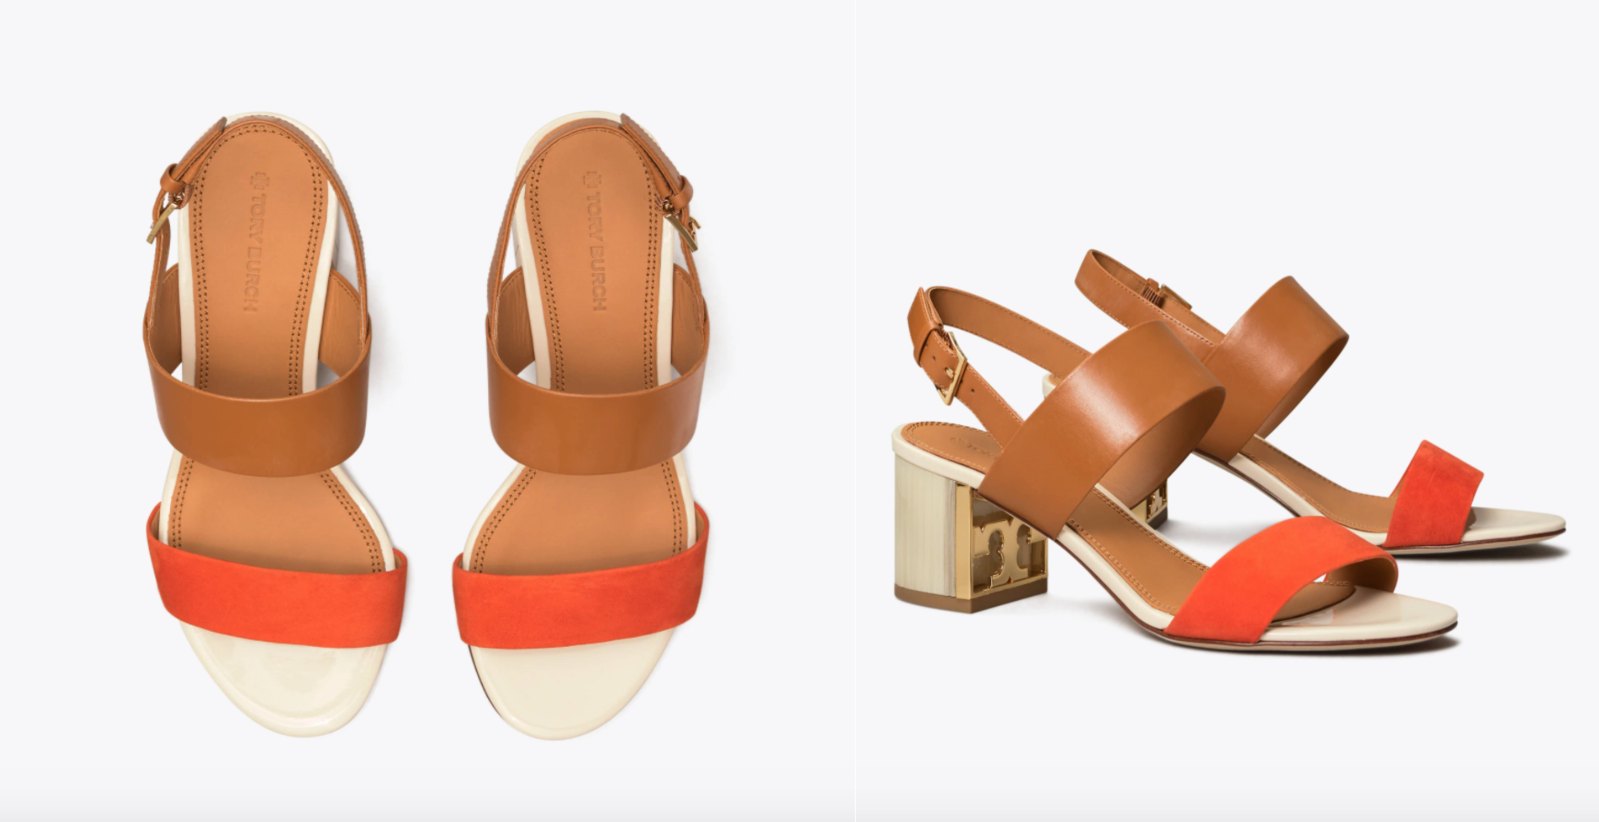 Tory Burch Semi-Annual Sale: 13 Best Sandals Up to 60% Off | Us Weekly